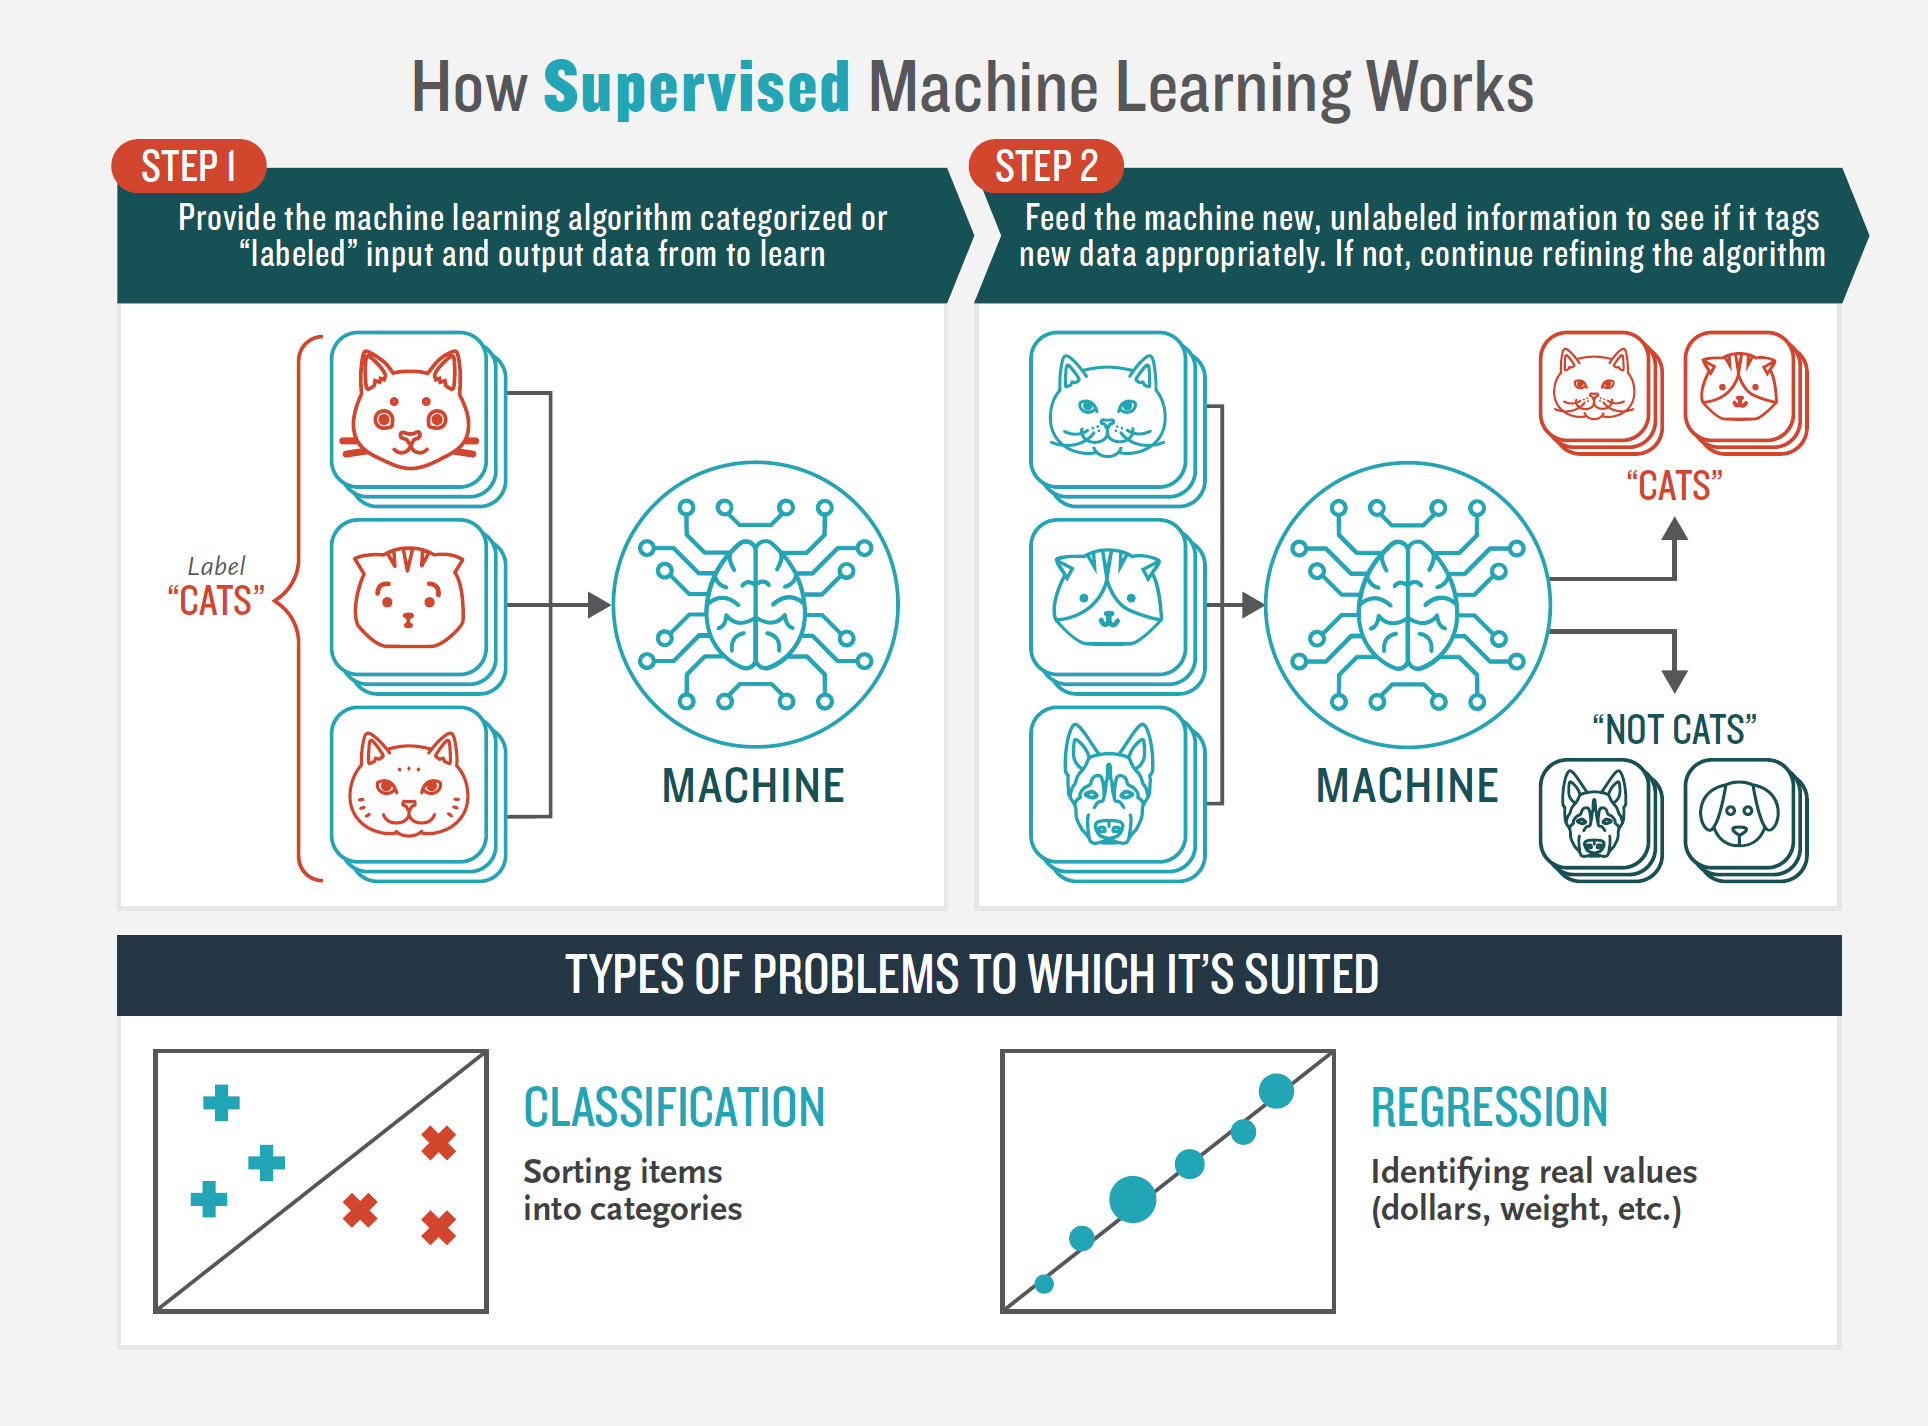 How supervised machine learning works